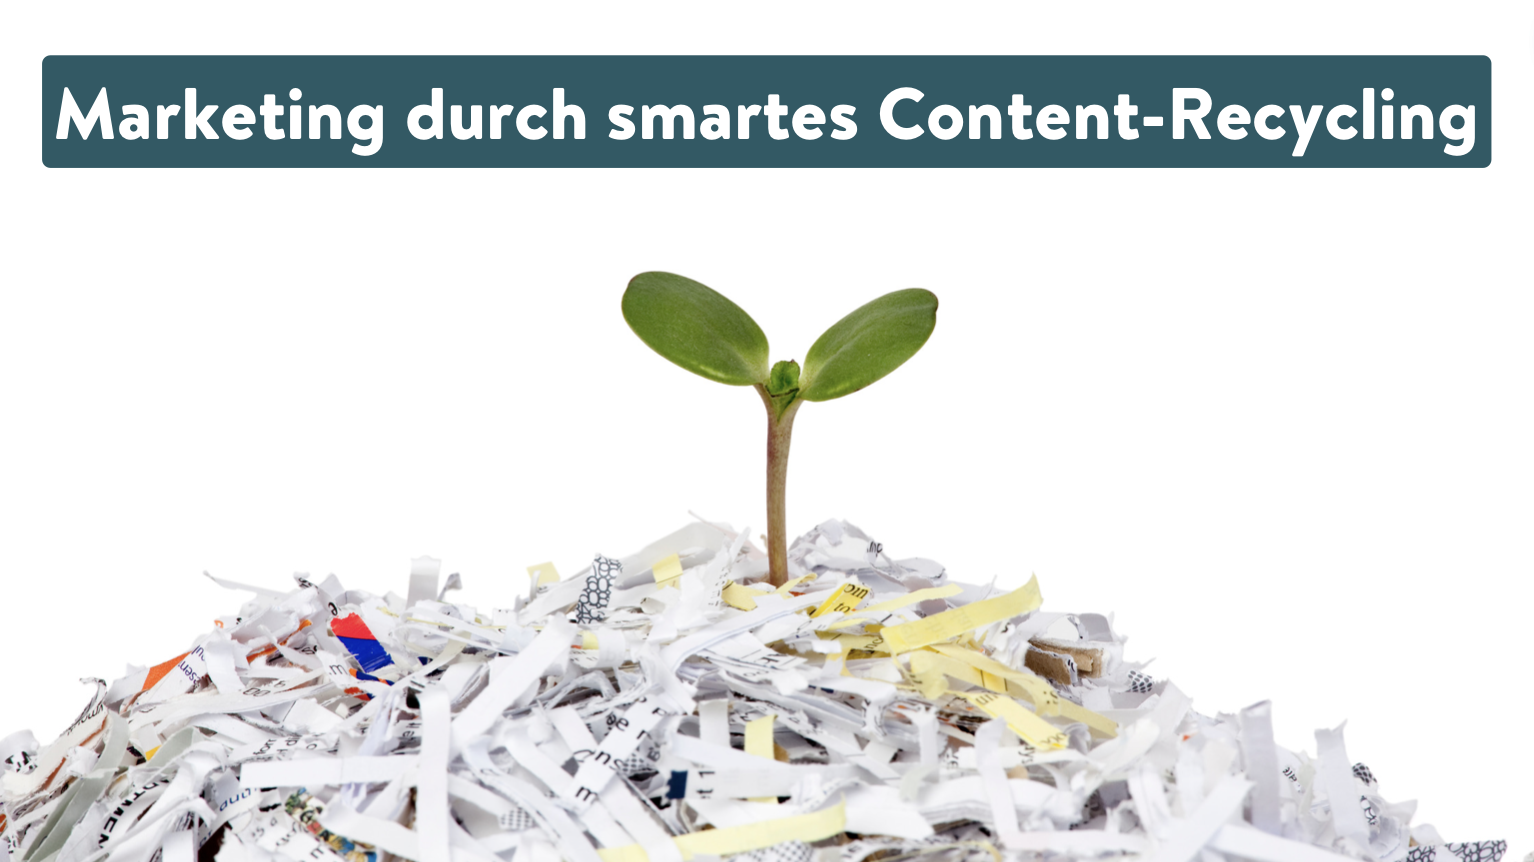 Null Stress im Podcast-Marketing durch smartes Content-Recycling